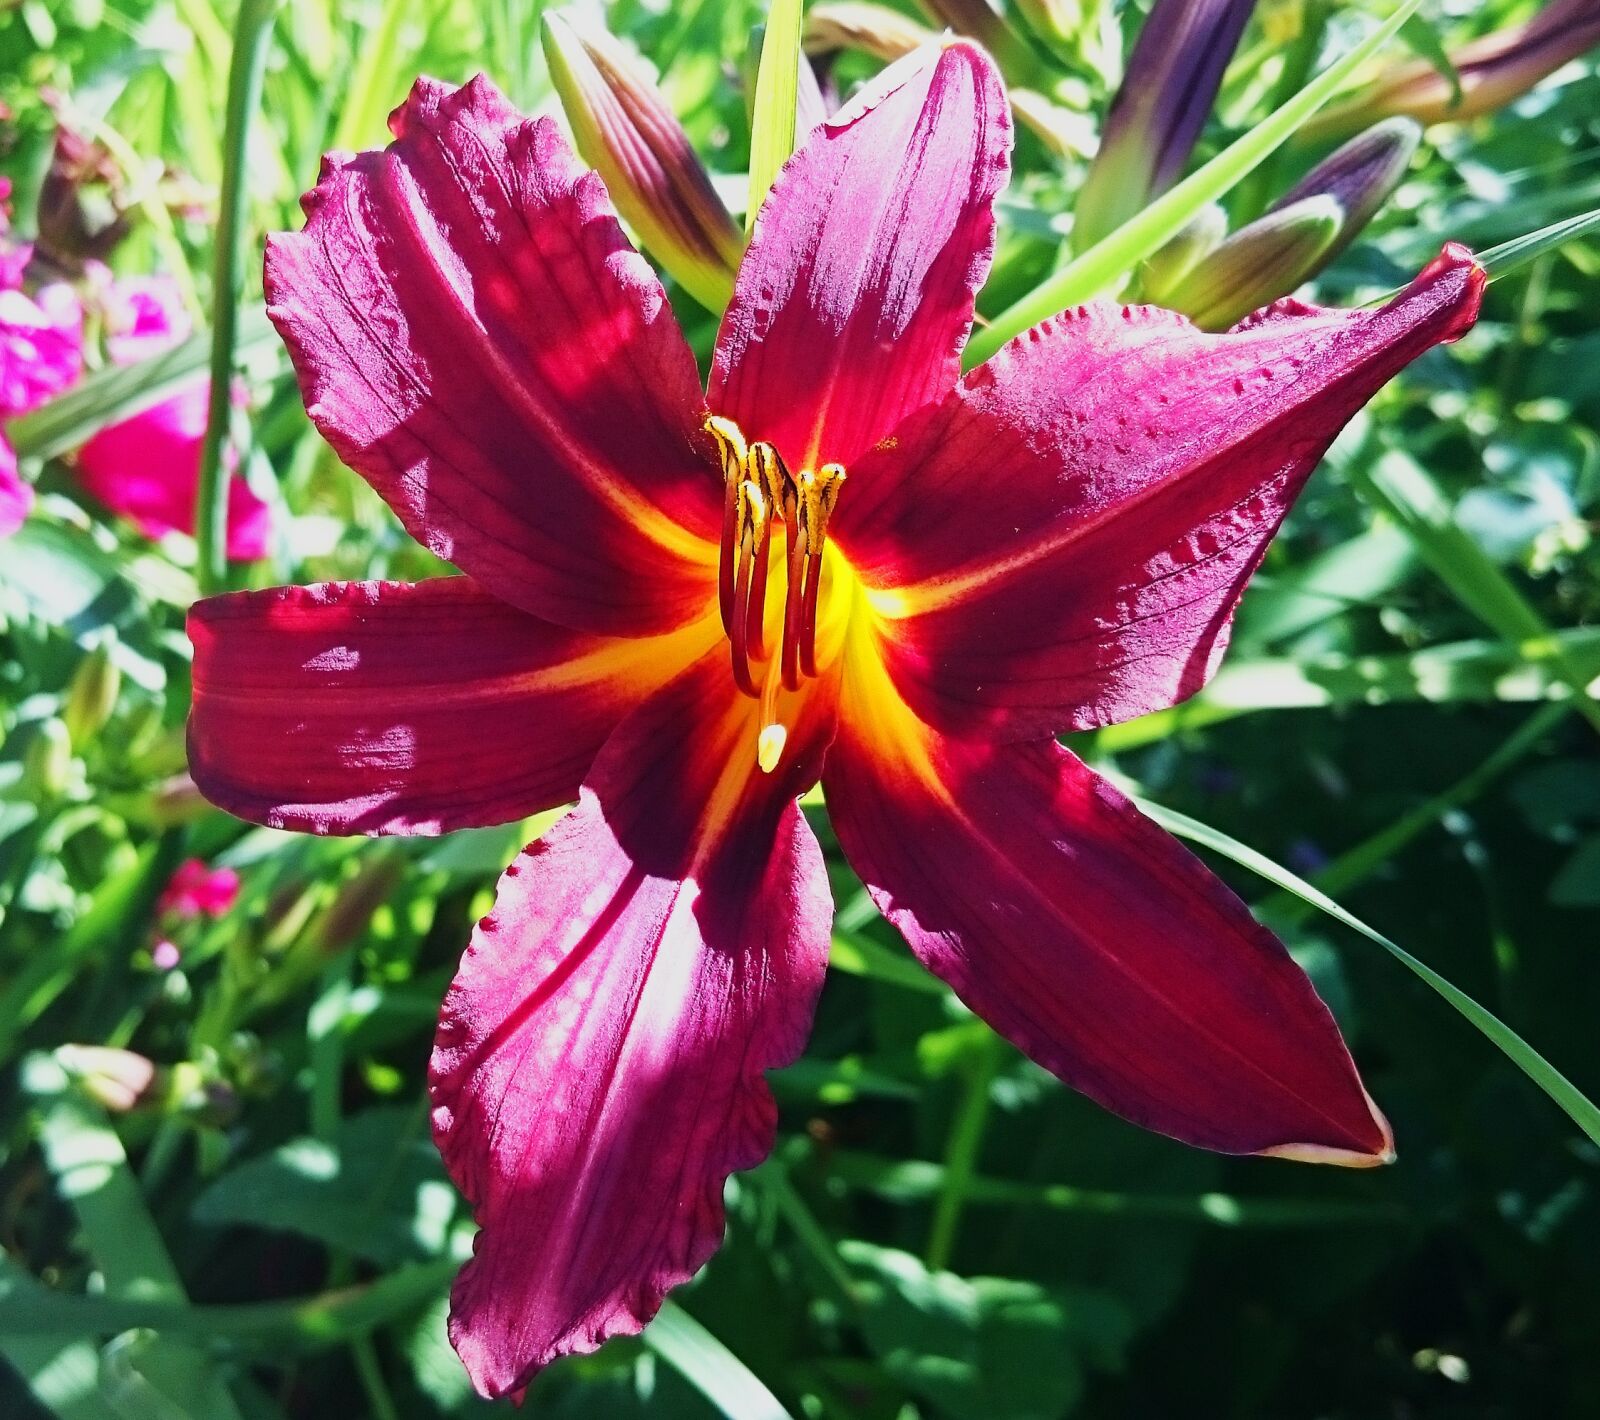 Sony Xperia Z3 sample photo. Lily, flower, flowers photography